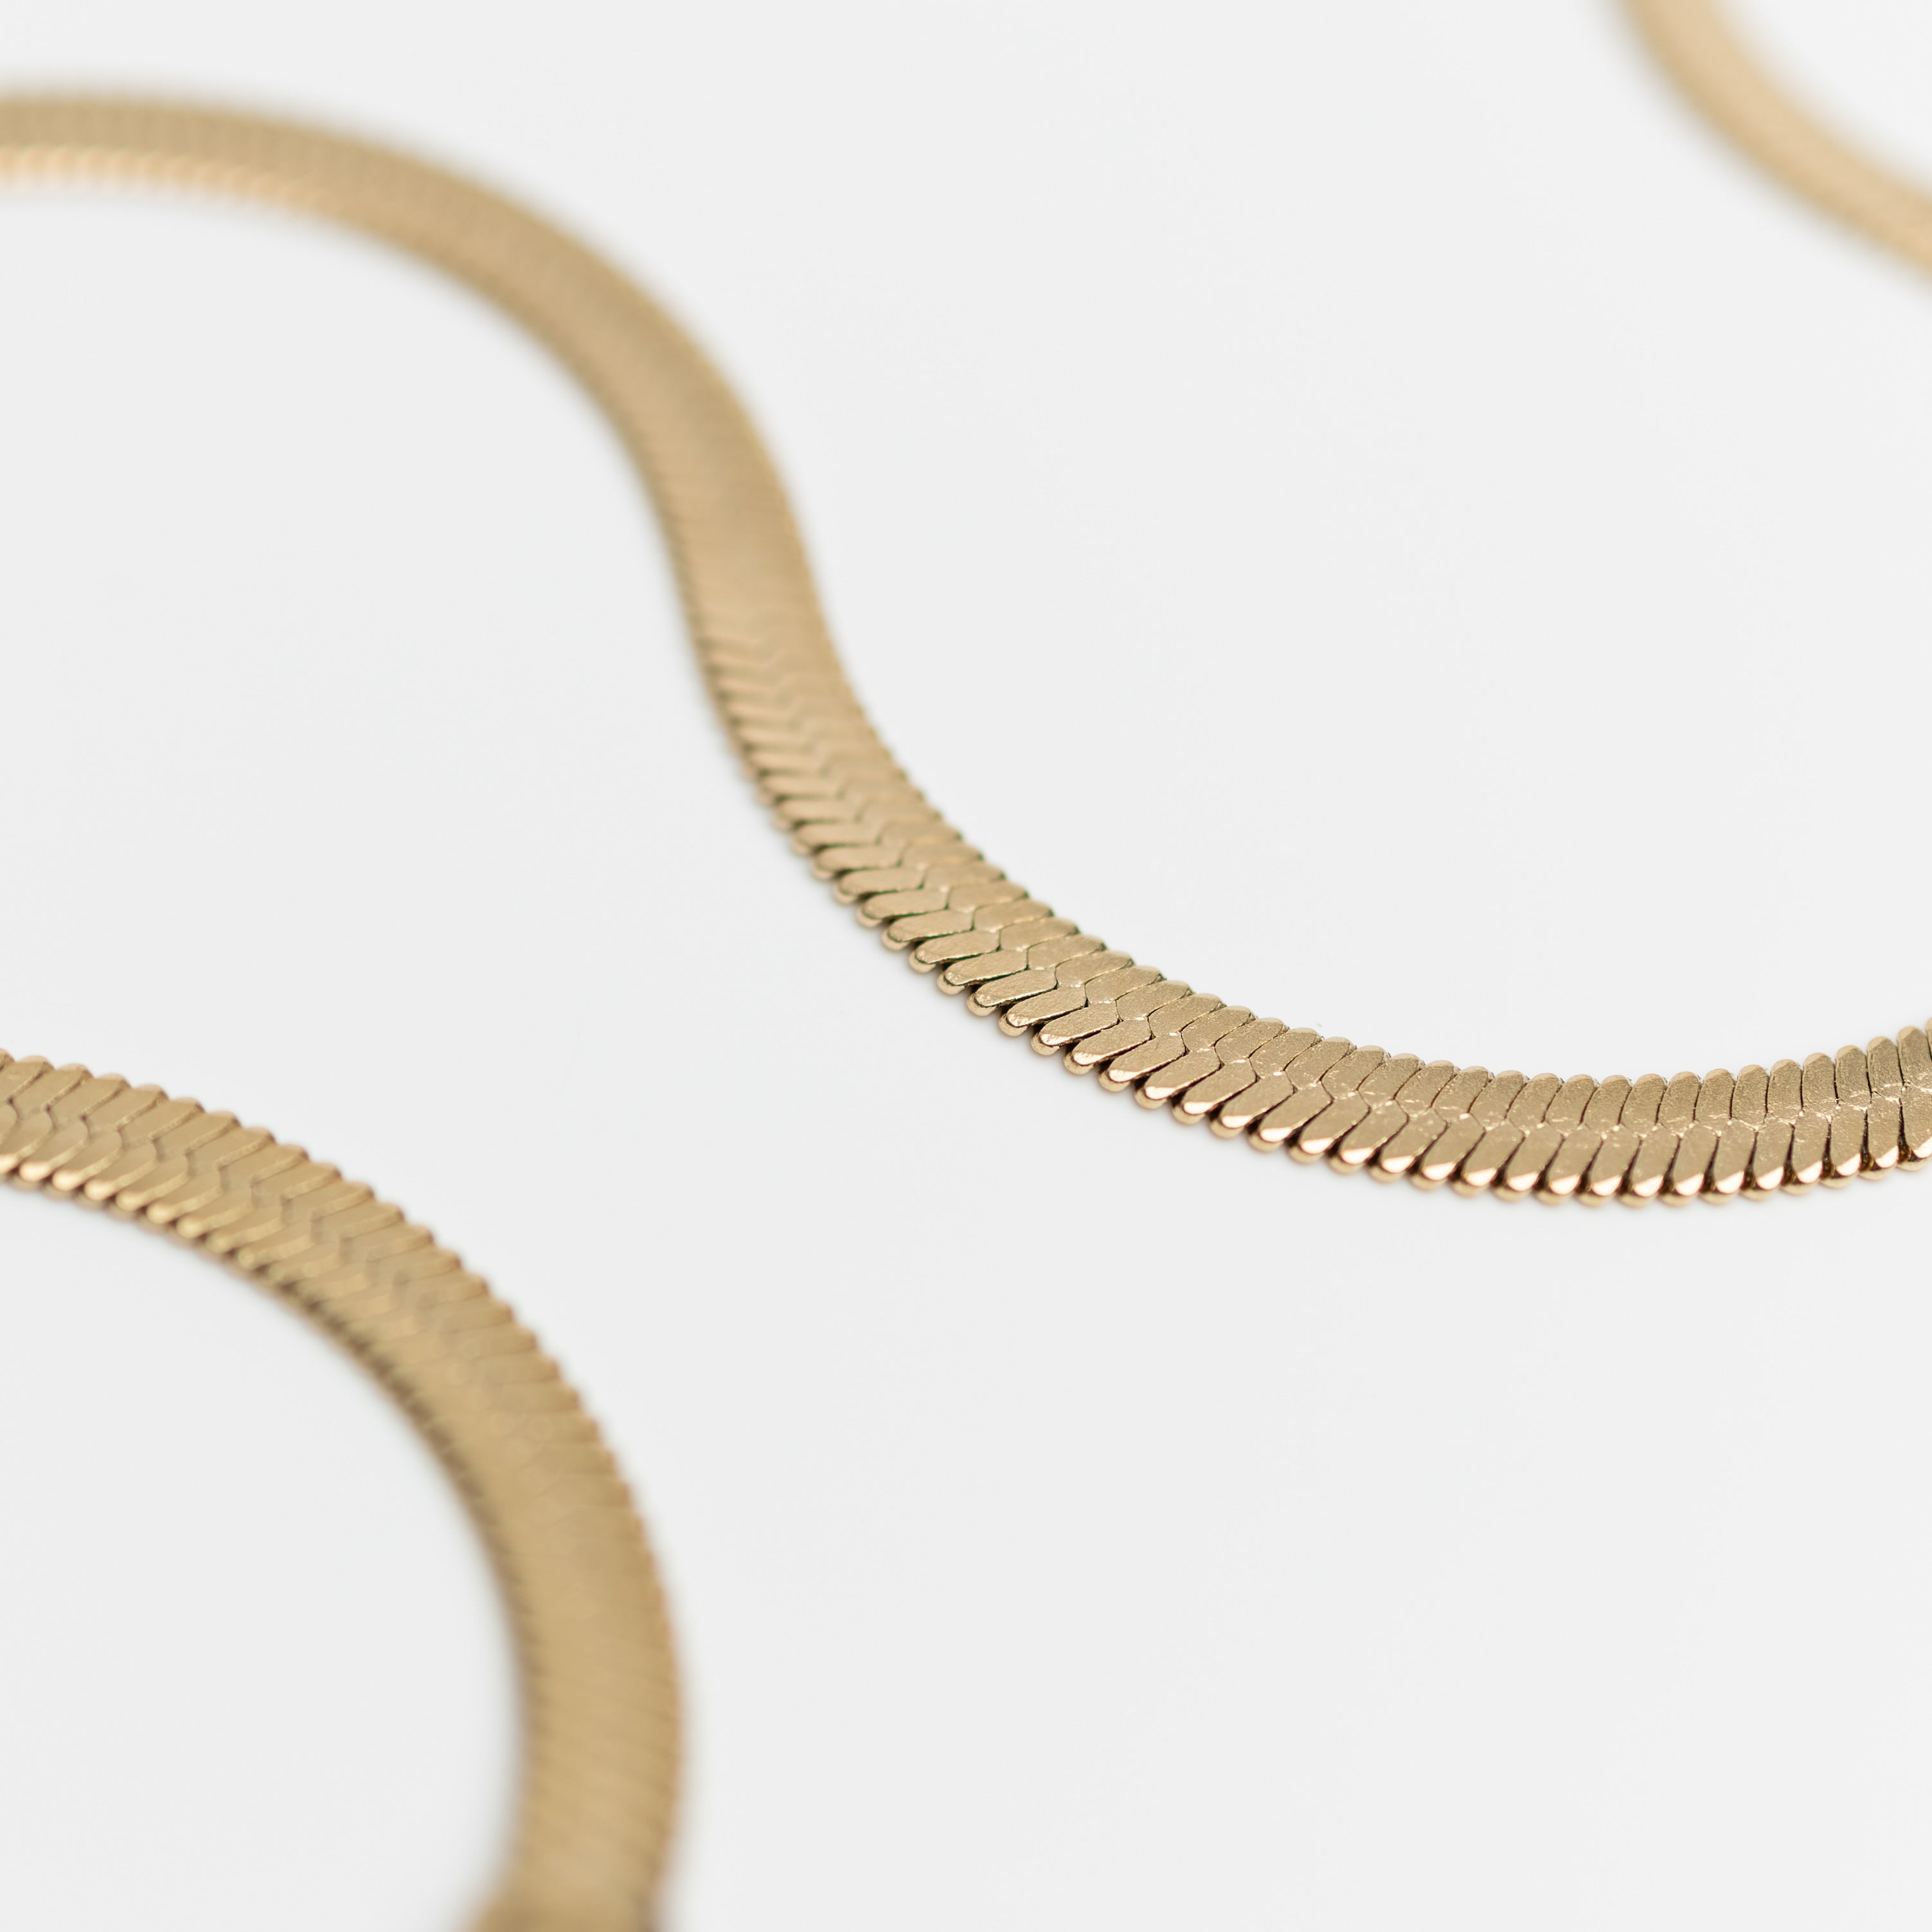 Nº2 - Stainless Steel 14K gold plated chain - Zafeer